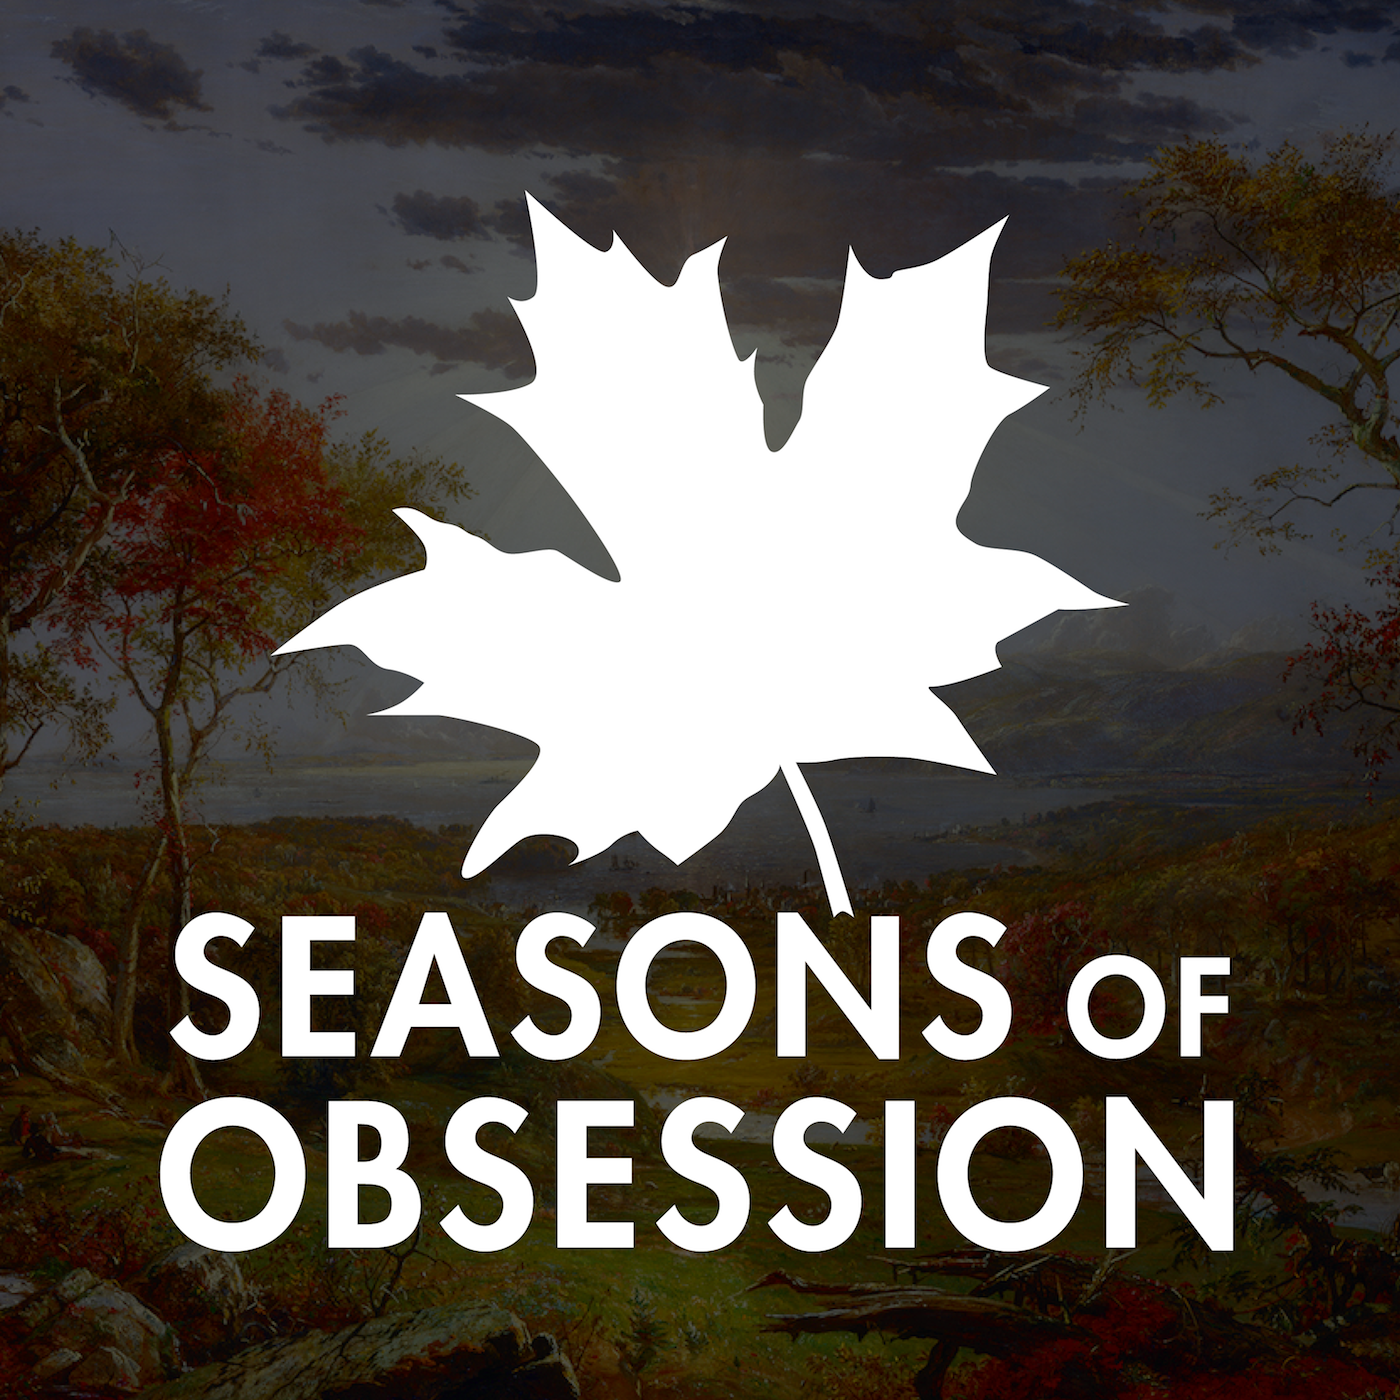 Seasons of Obsession